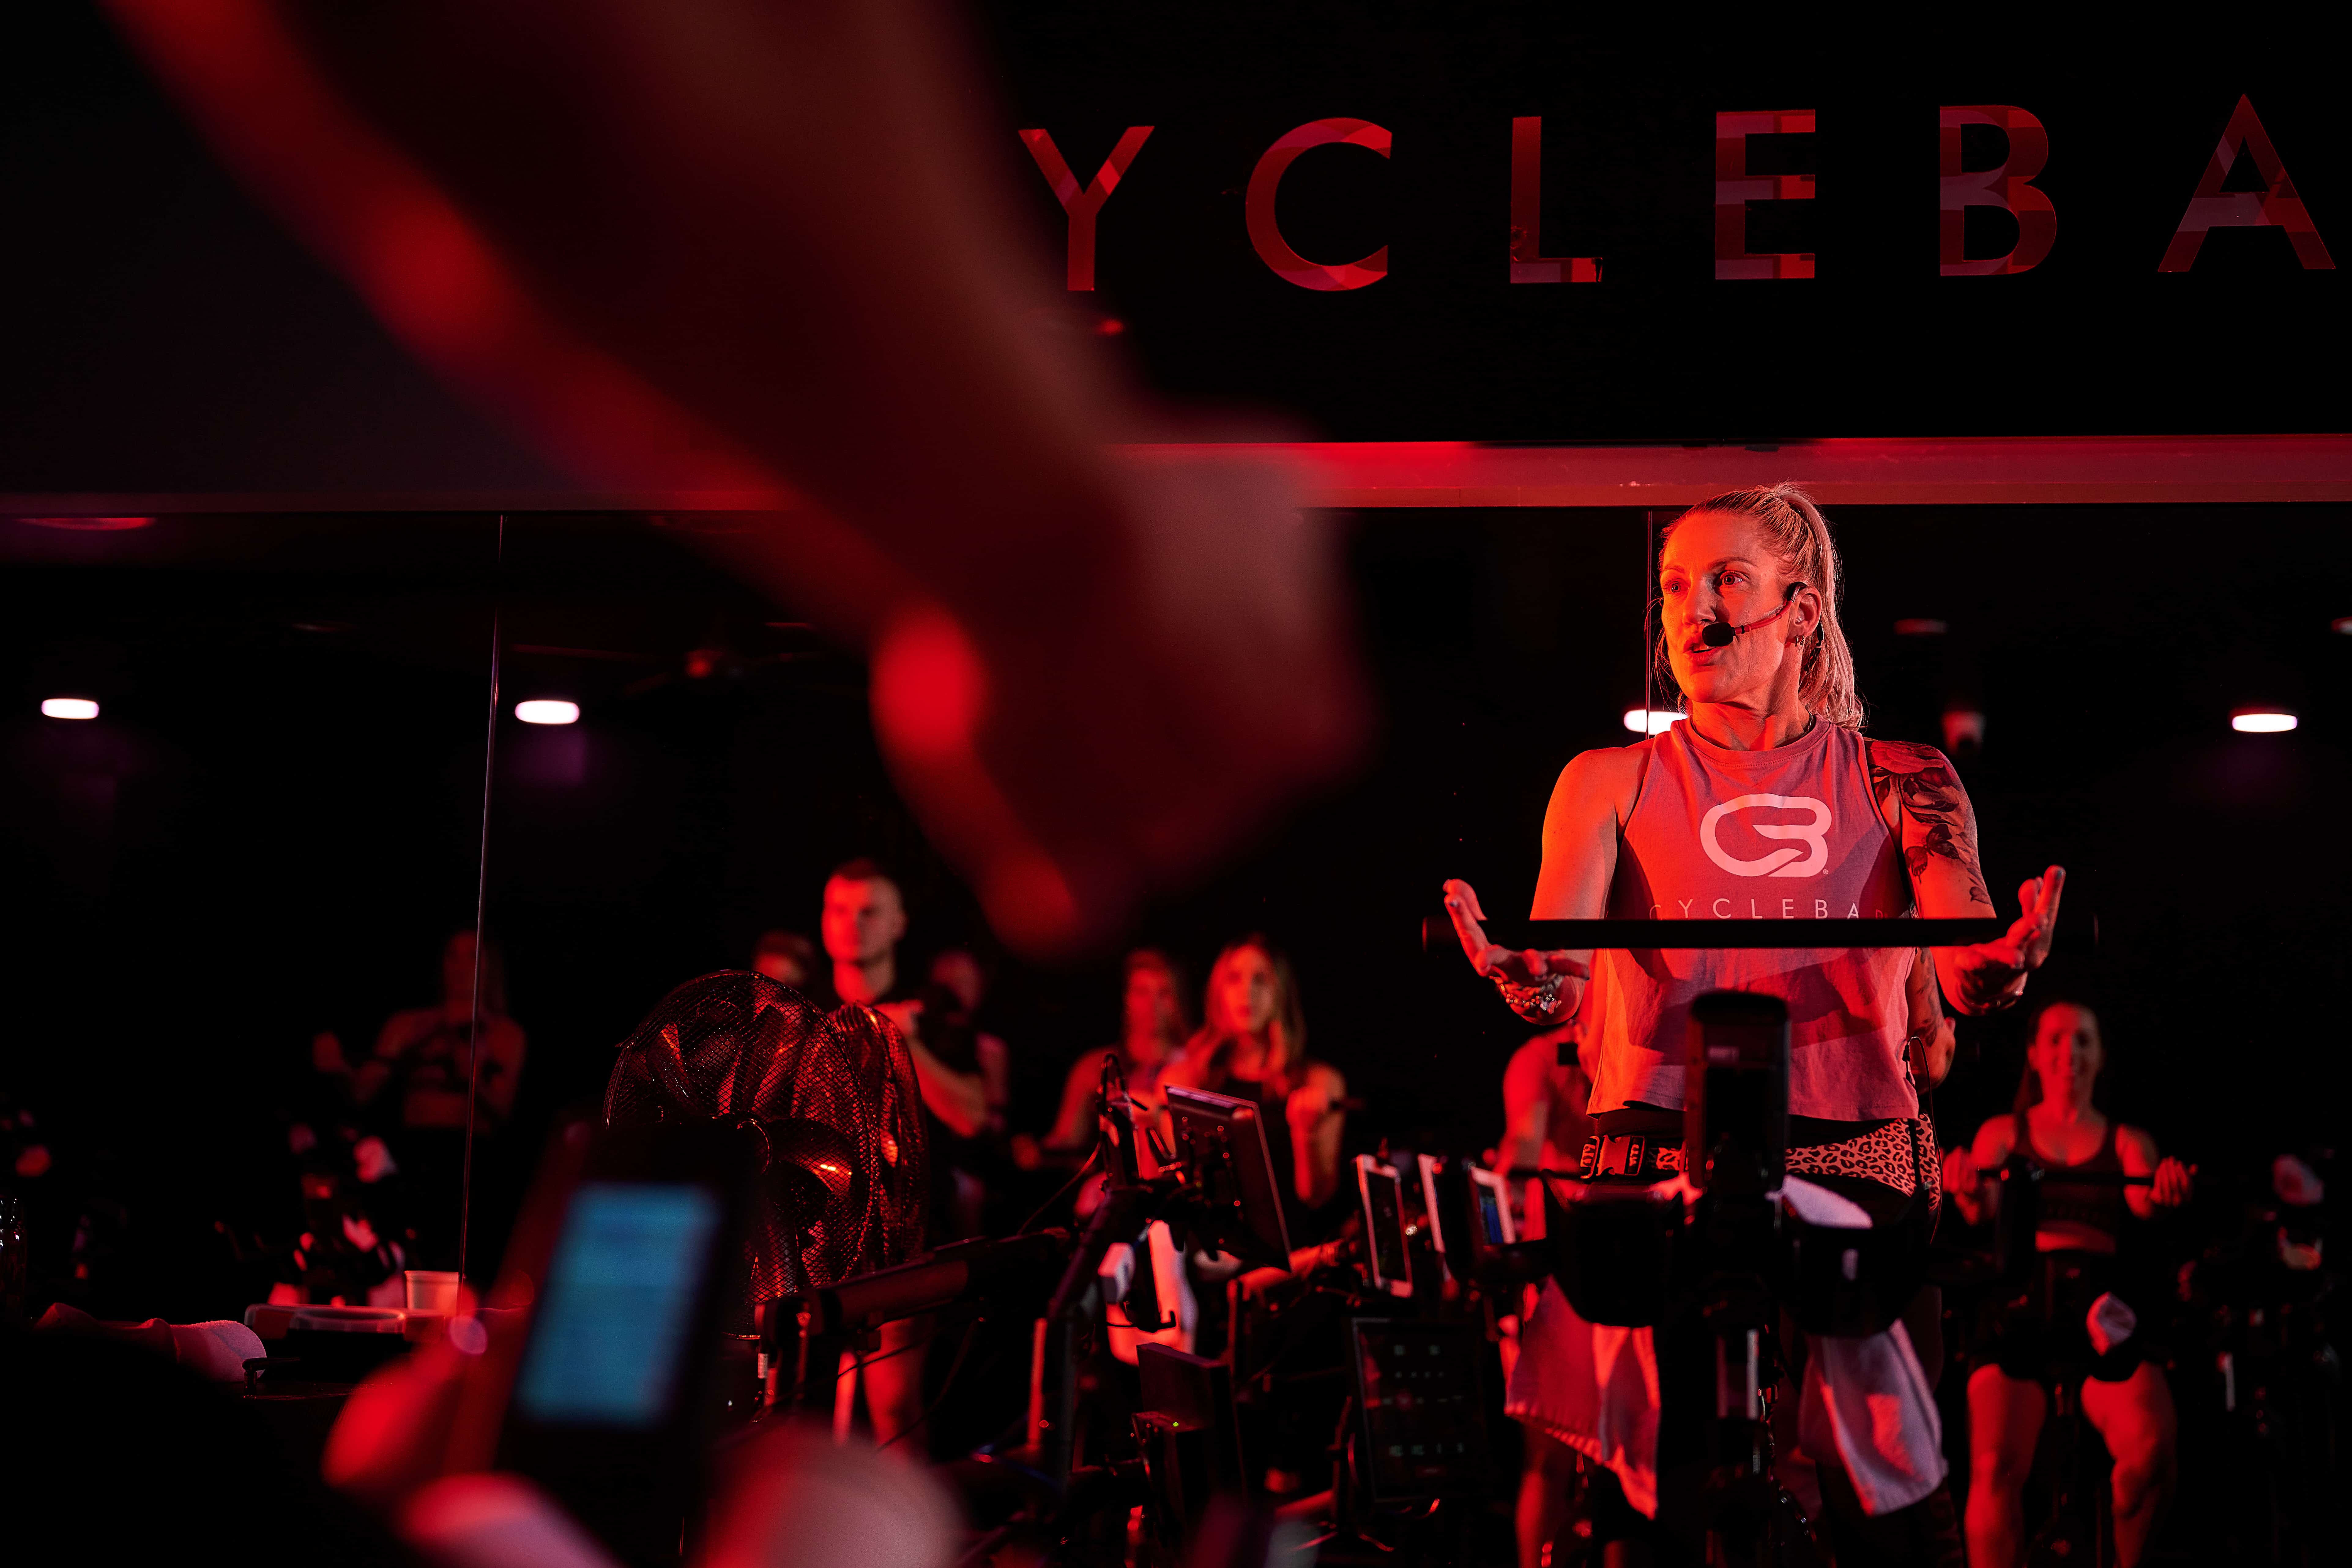 Melbourne Cycle classes